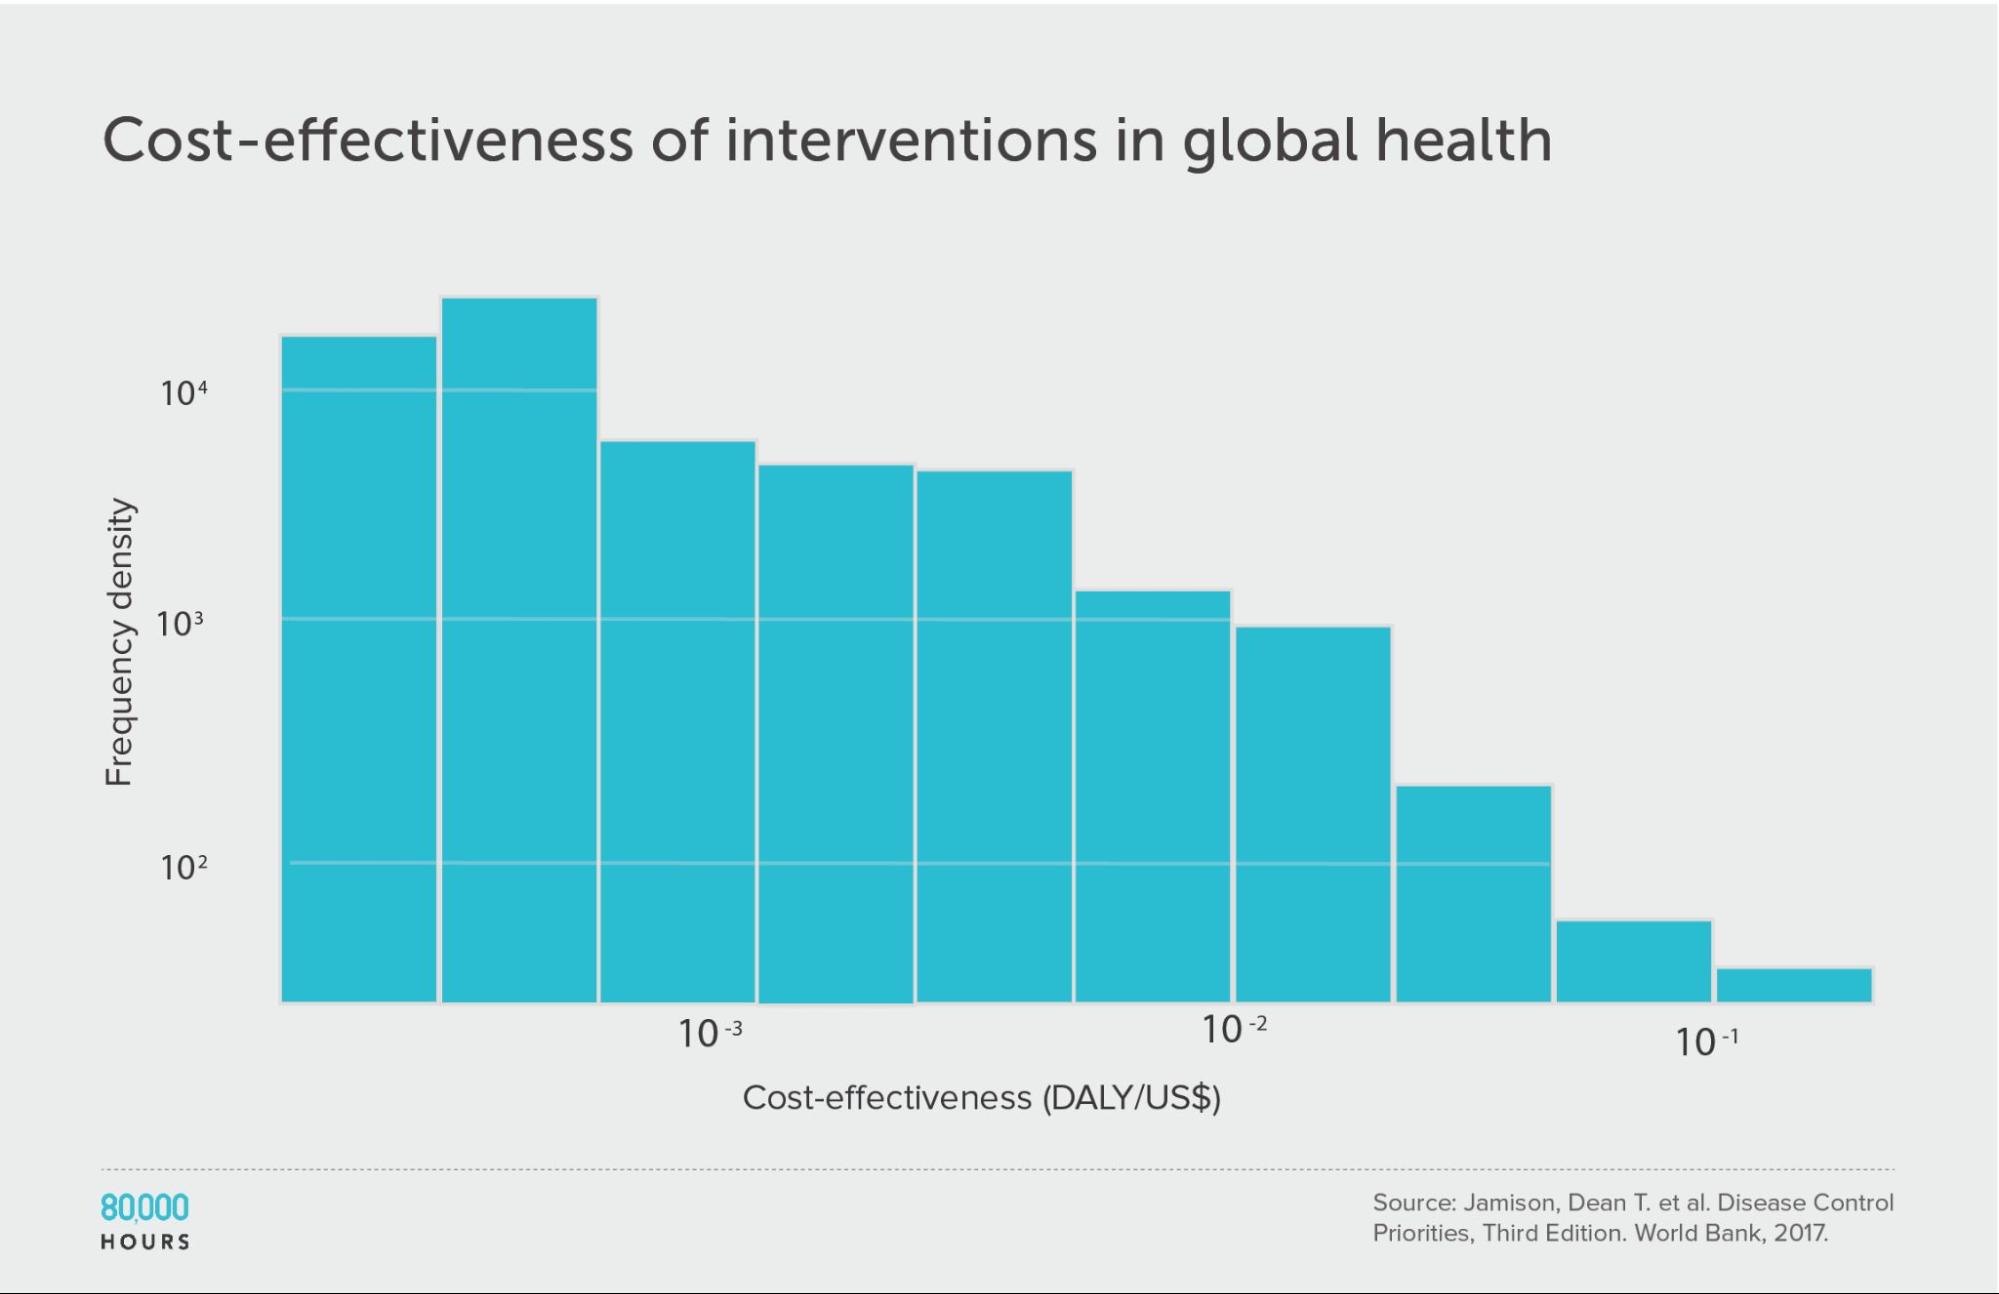 Logarithmic binned histogram of the cost effectiveness of health interventions in developing countries in terms of how many years of illness they prevent, according to data from the DCP3